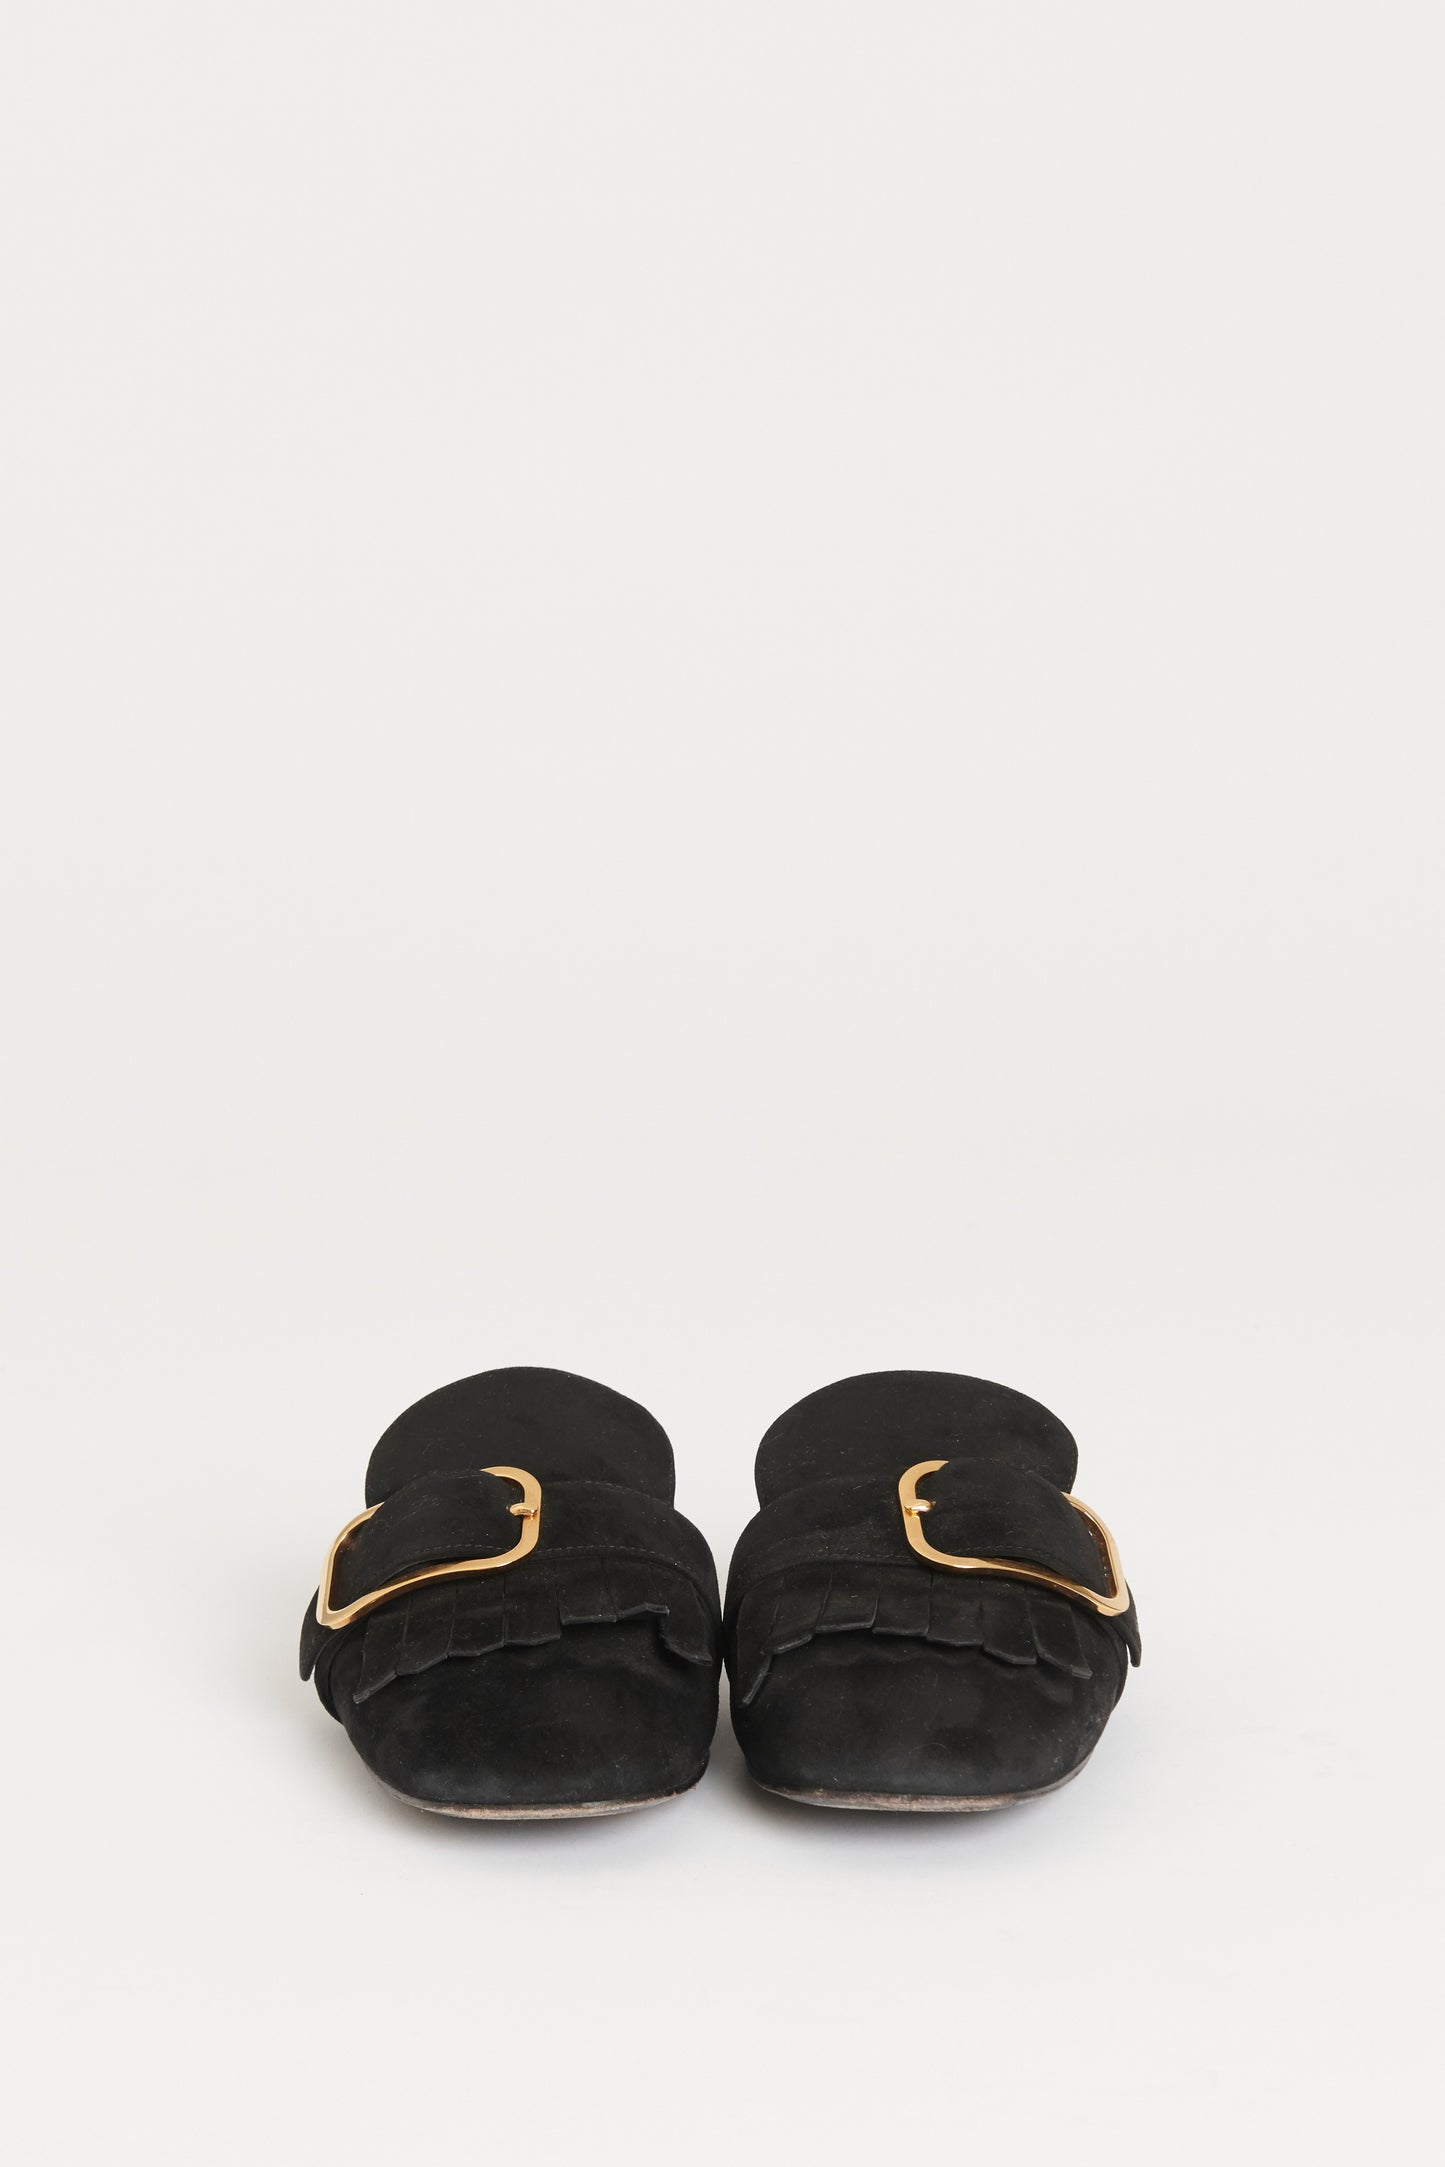 Black Suede Kiltie Preowned Fringed Loafer Mules